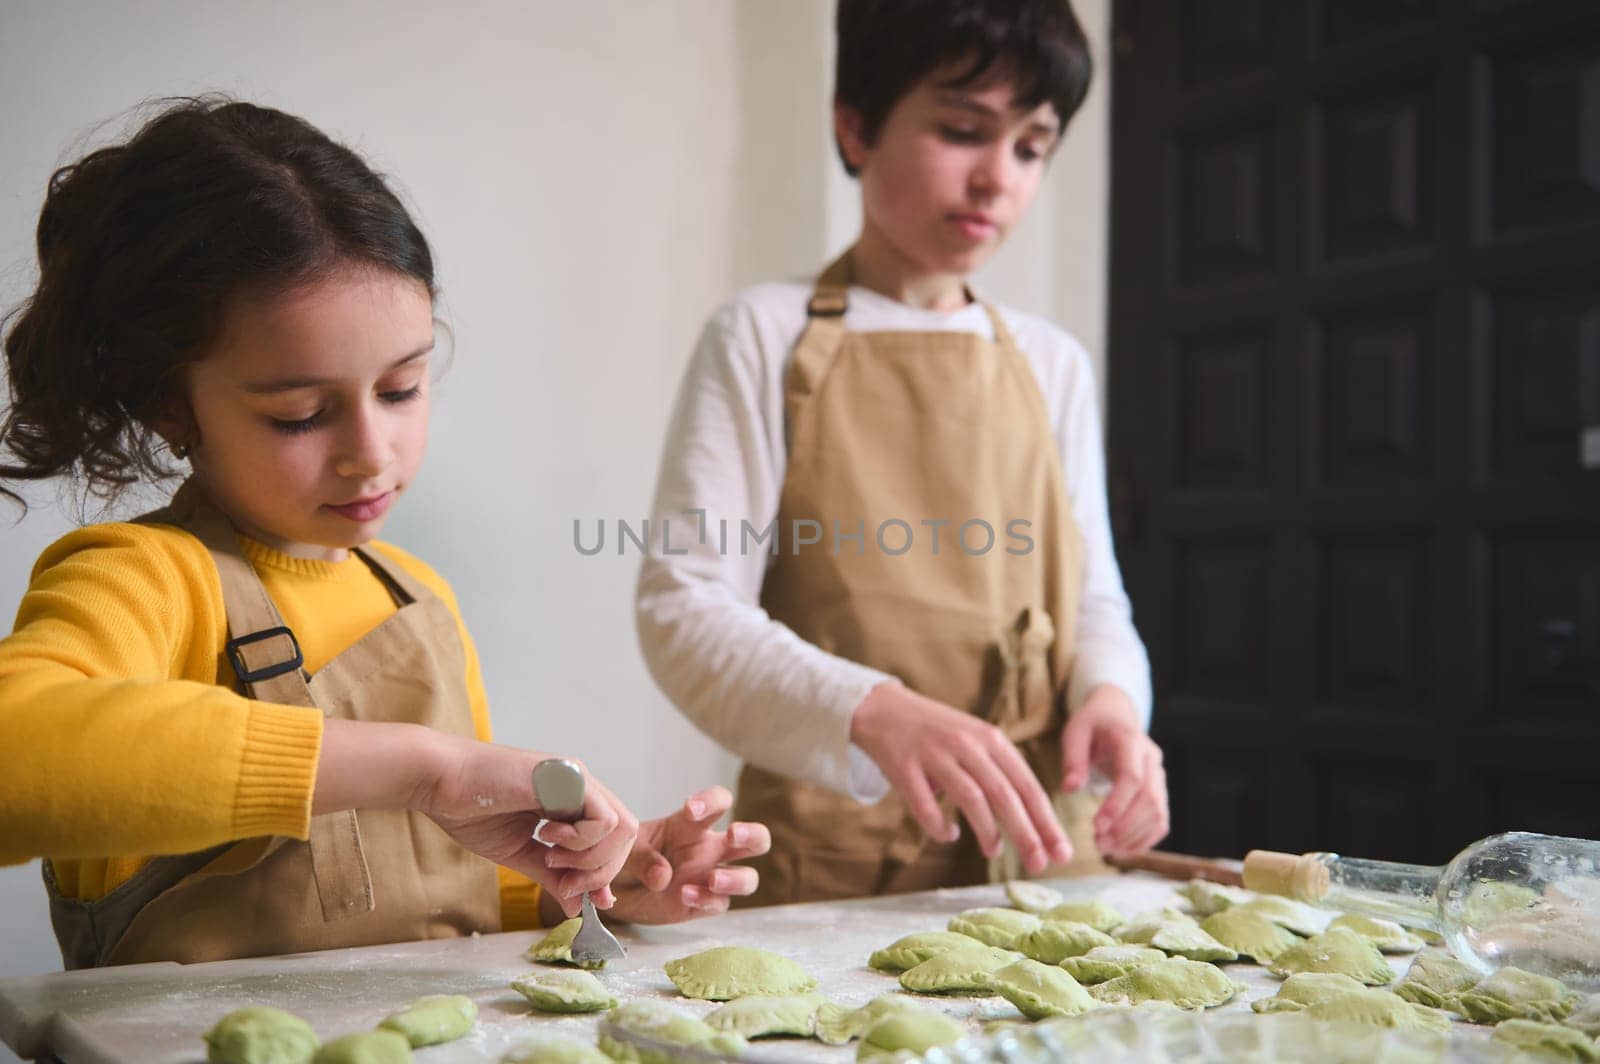 Brother and sister in beige chef's aprons, stuffing rolled dough rounds, making dumplings in the rural house kitchen interior. Adorable school children preparing dinner, learning the culinary at home